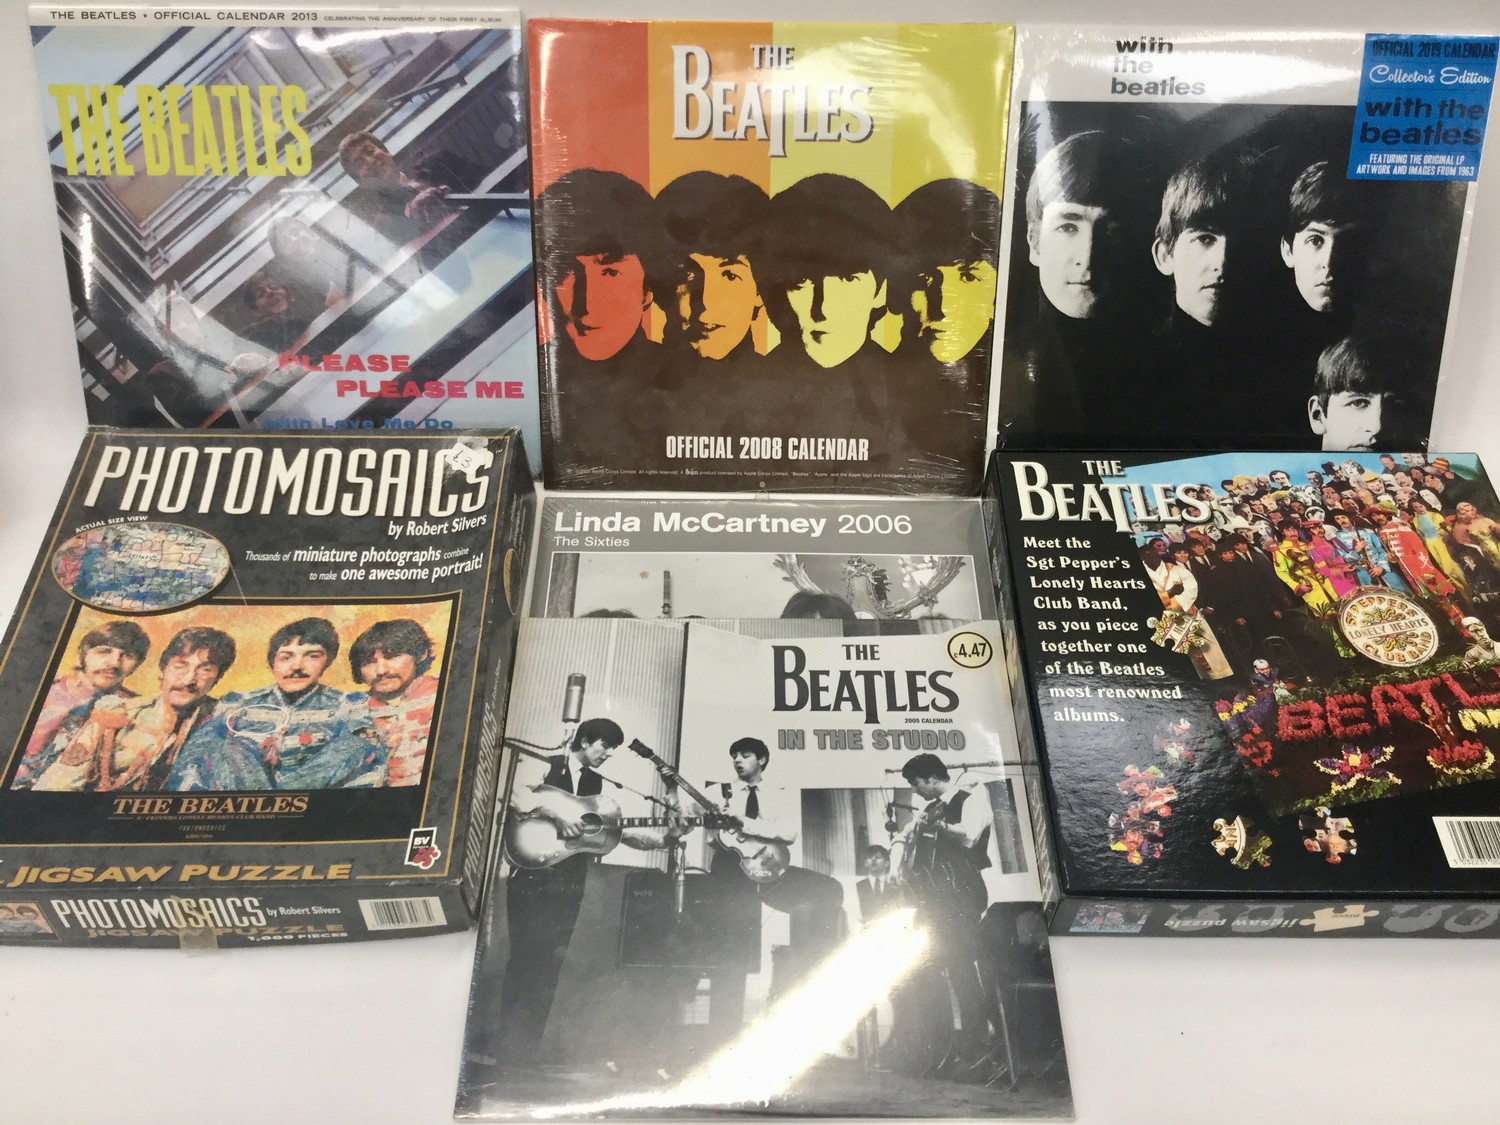 BEATLES PUZZLES AND CALENDARS. 2 puzzles in this lot along with 4 sealed Beatles calendars from